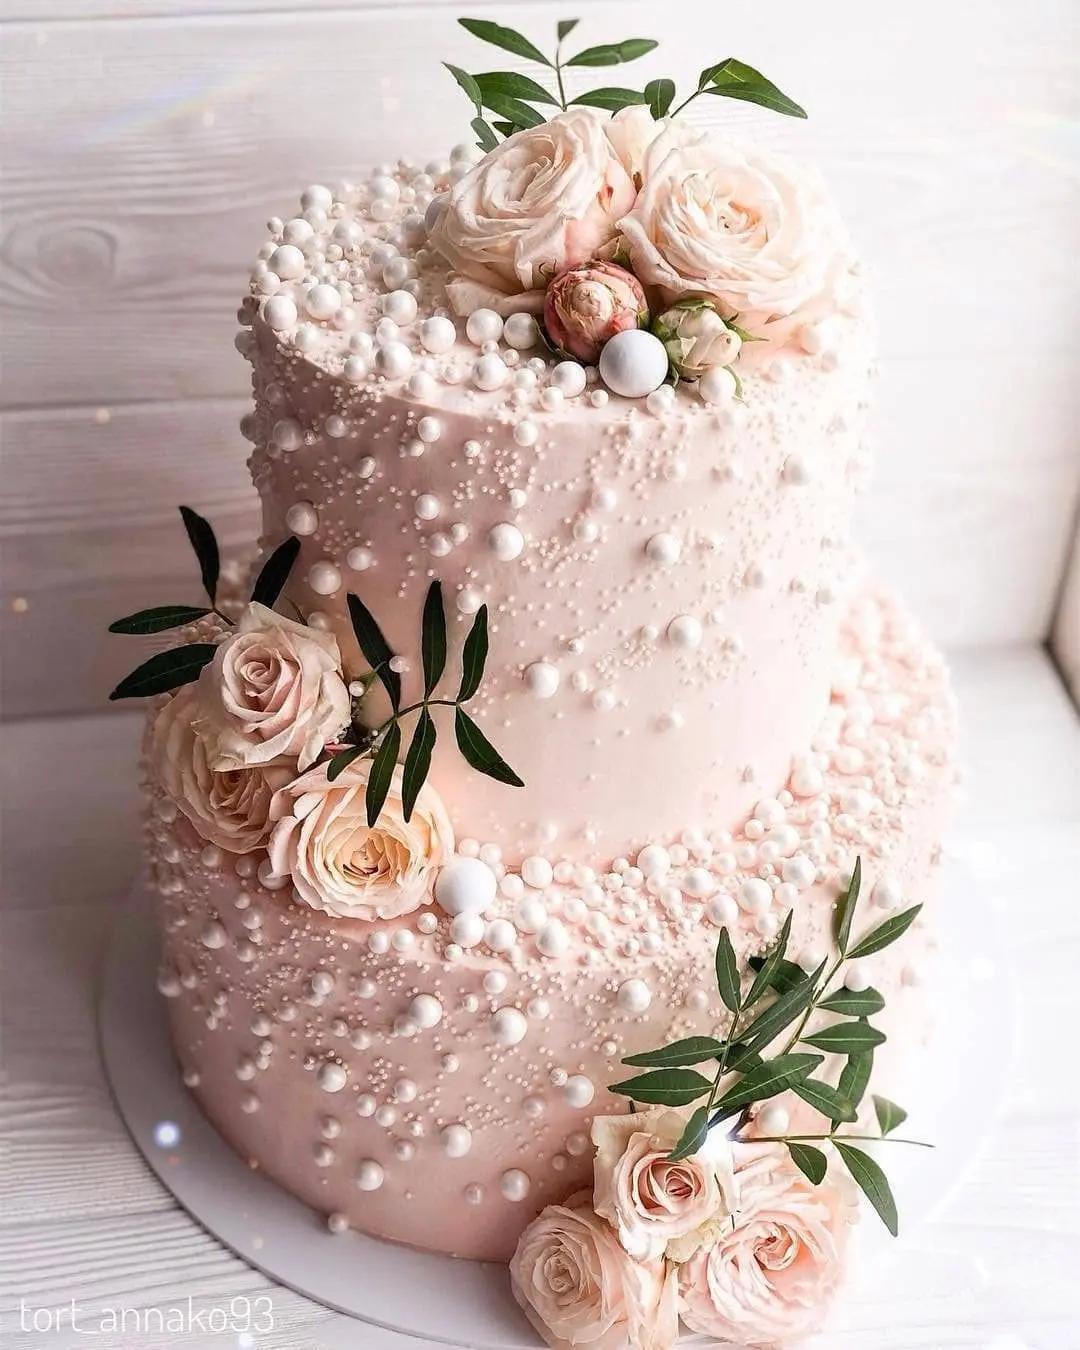 Winter Wedding Cakes That Perfect For Any Type Of Winter Wedding